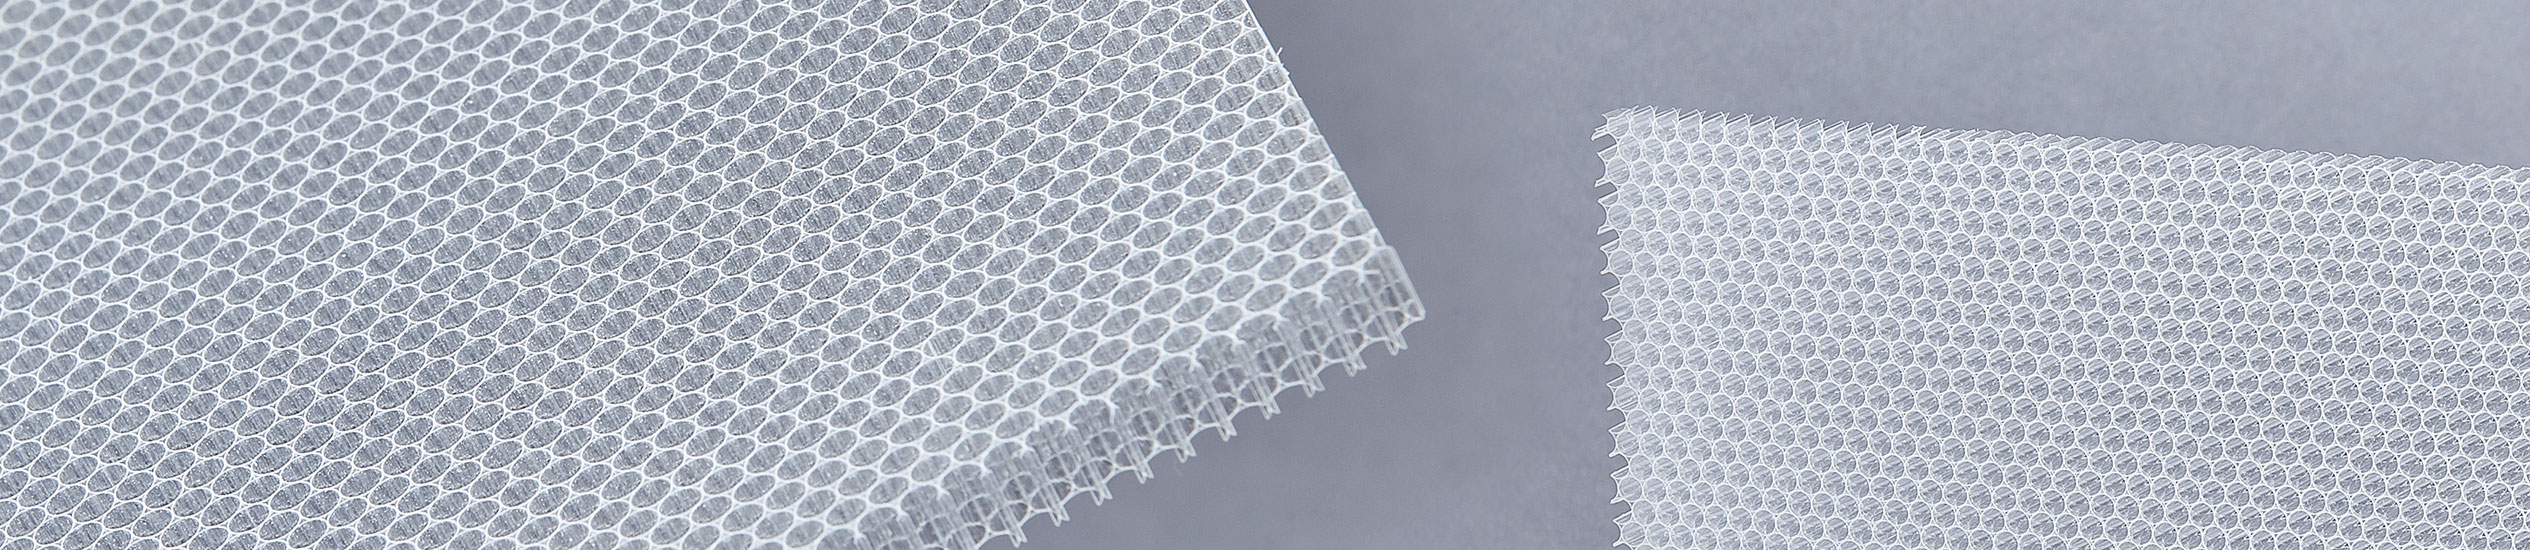 Polycarbonate honeycomb finds major applications in:deflectors for laminar-flow ventilation,commercial refrigeration,sterilized rooms,wind tunnels and climatic